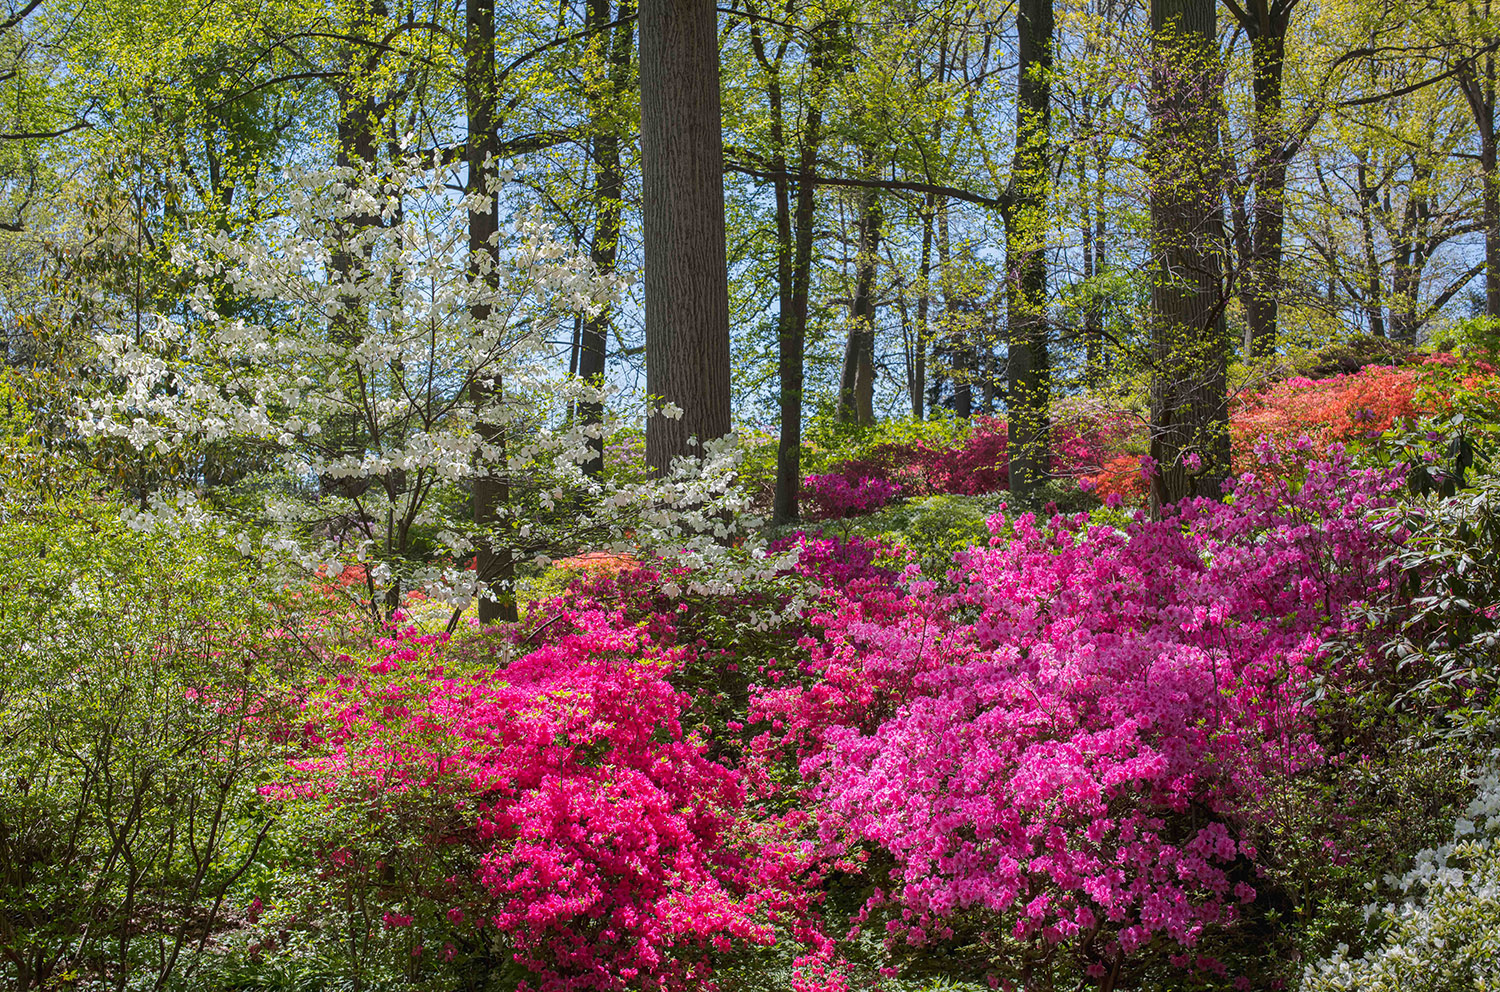 A forest begins to leaf out in pale green growth as purple and pink azaleas bloom beneath the trees